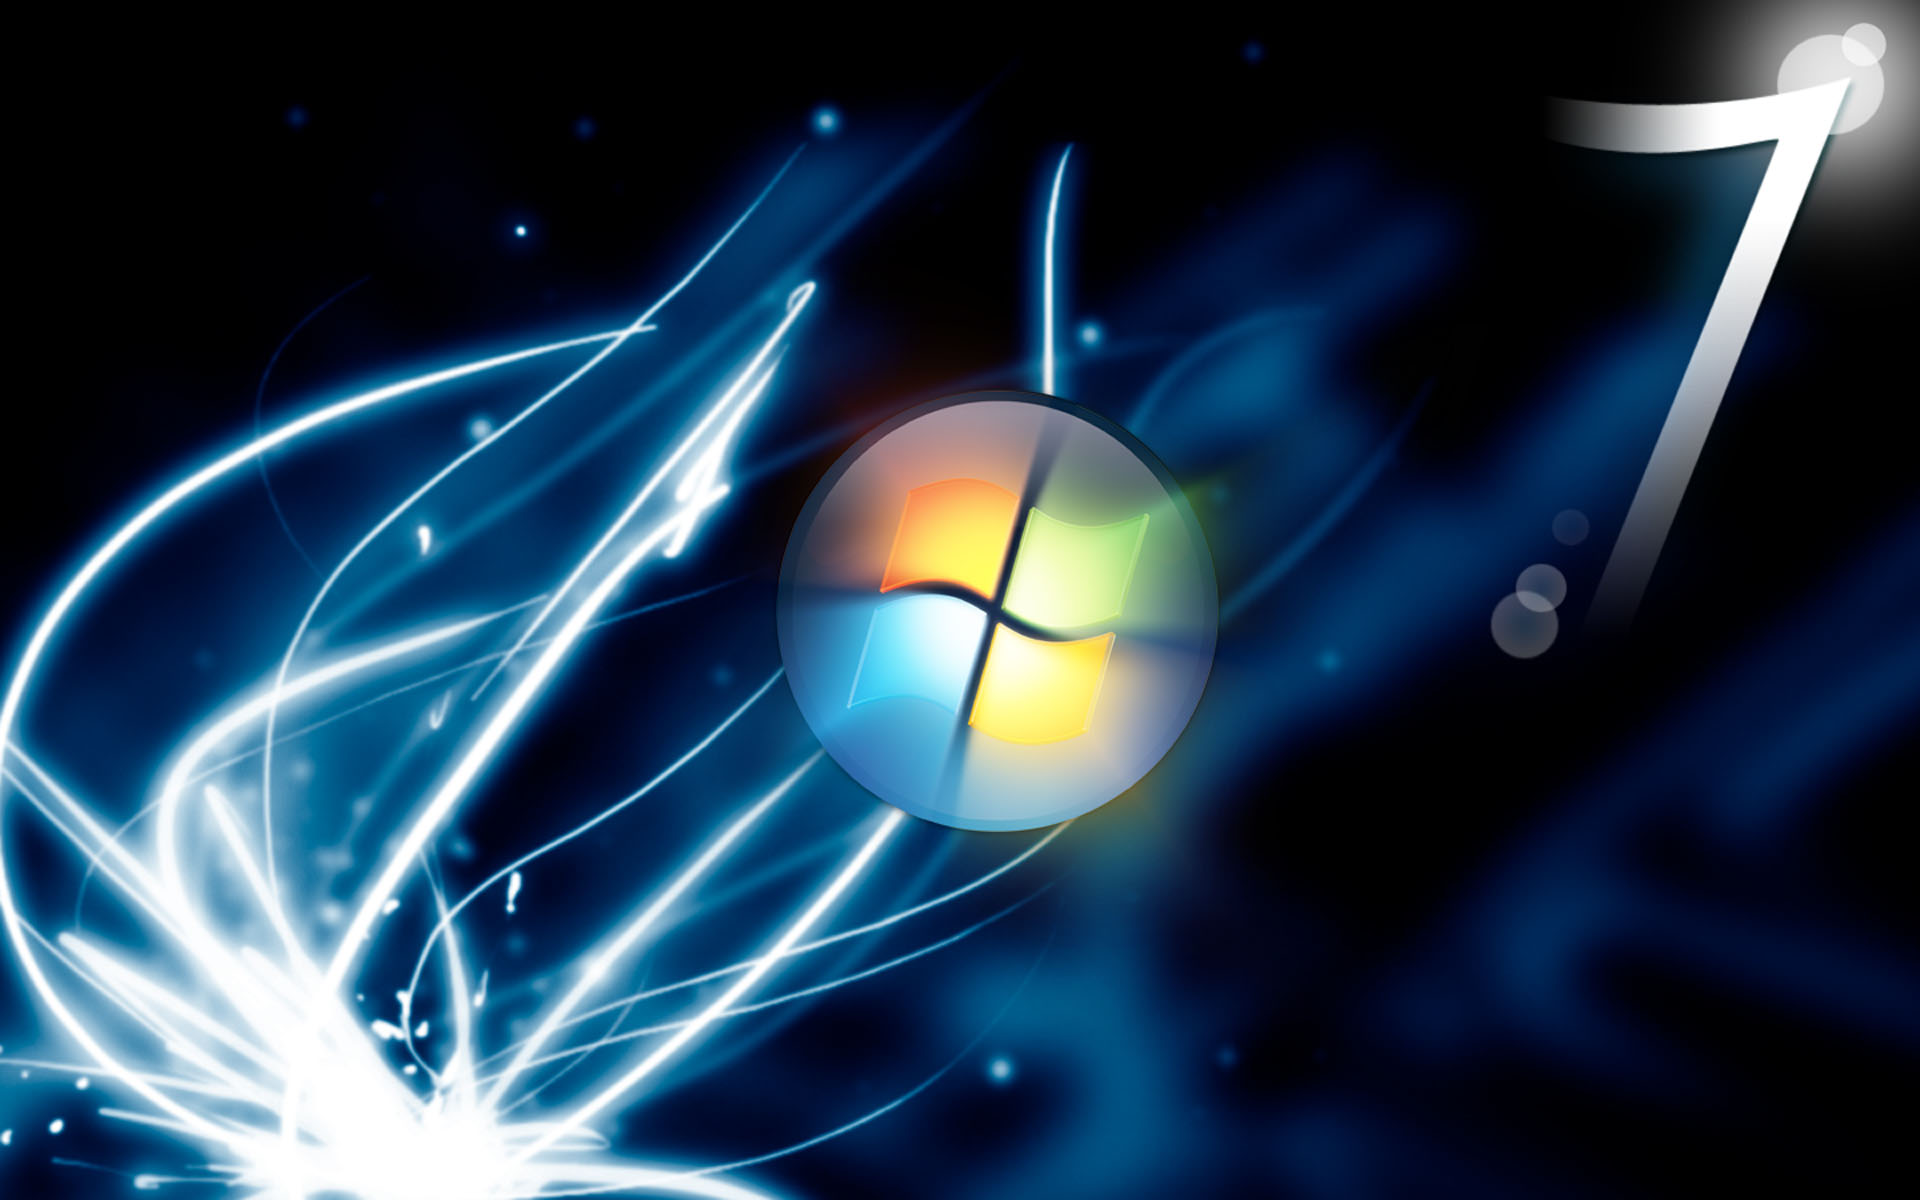 Free HQ Windows 7 Ultimate 43 Wallpaper   Free HQ Wallpapers